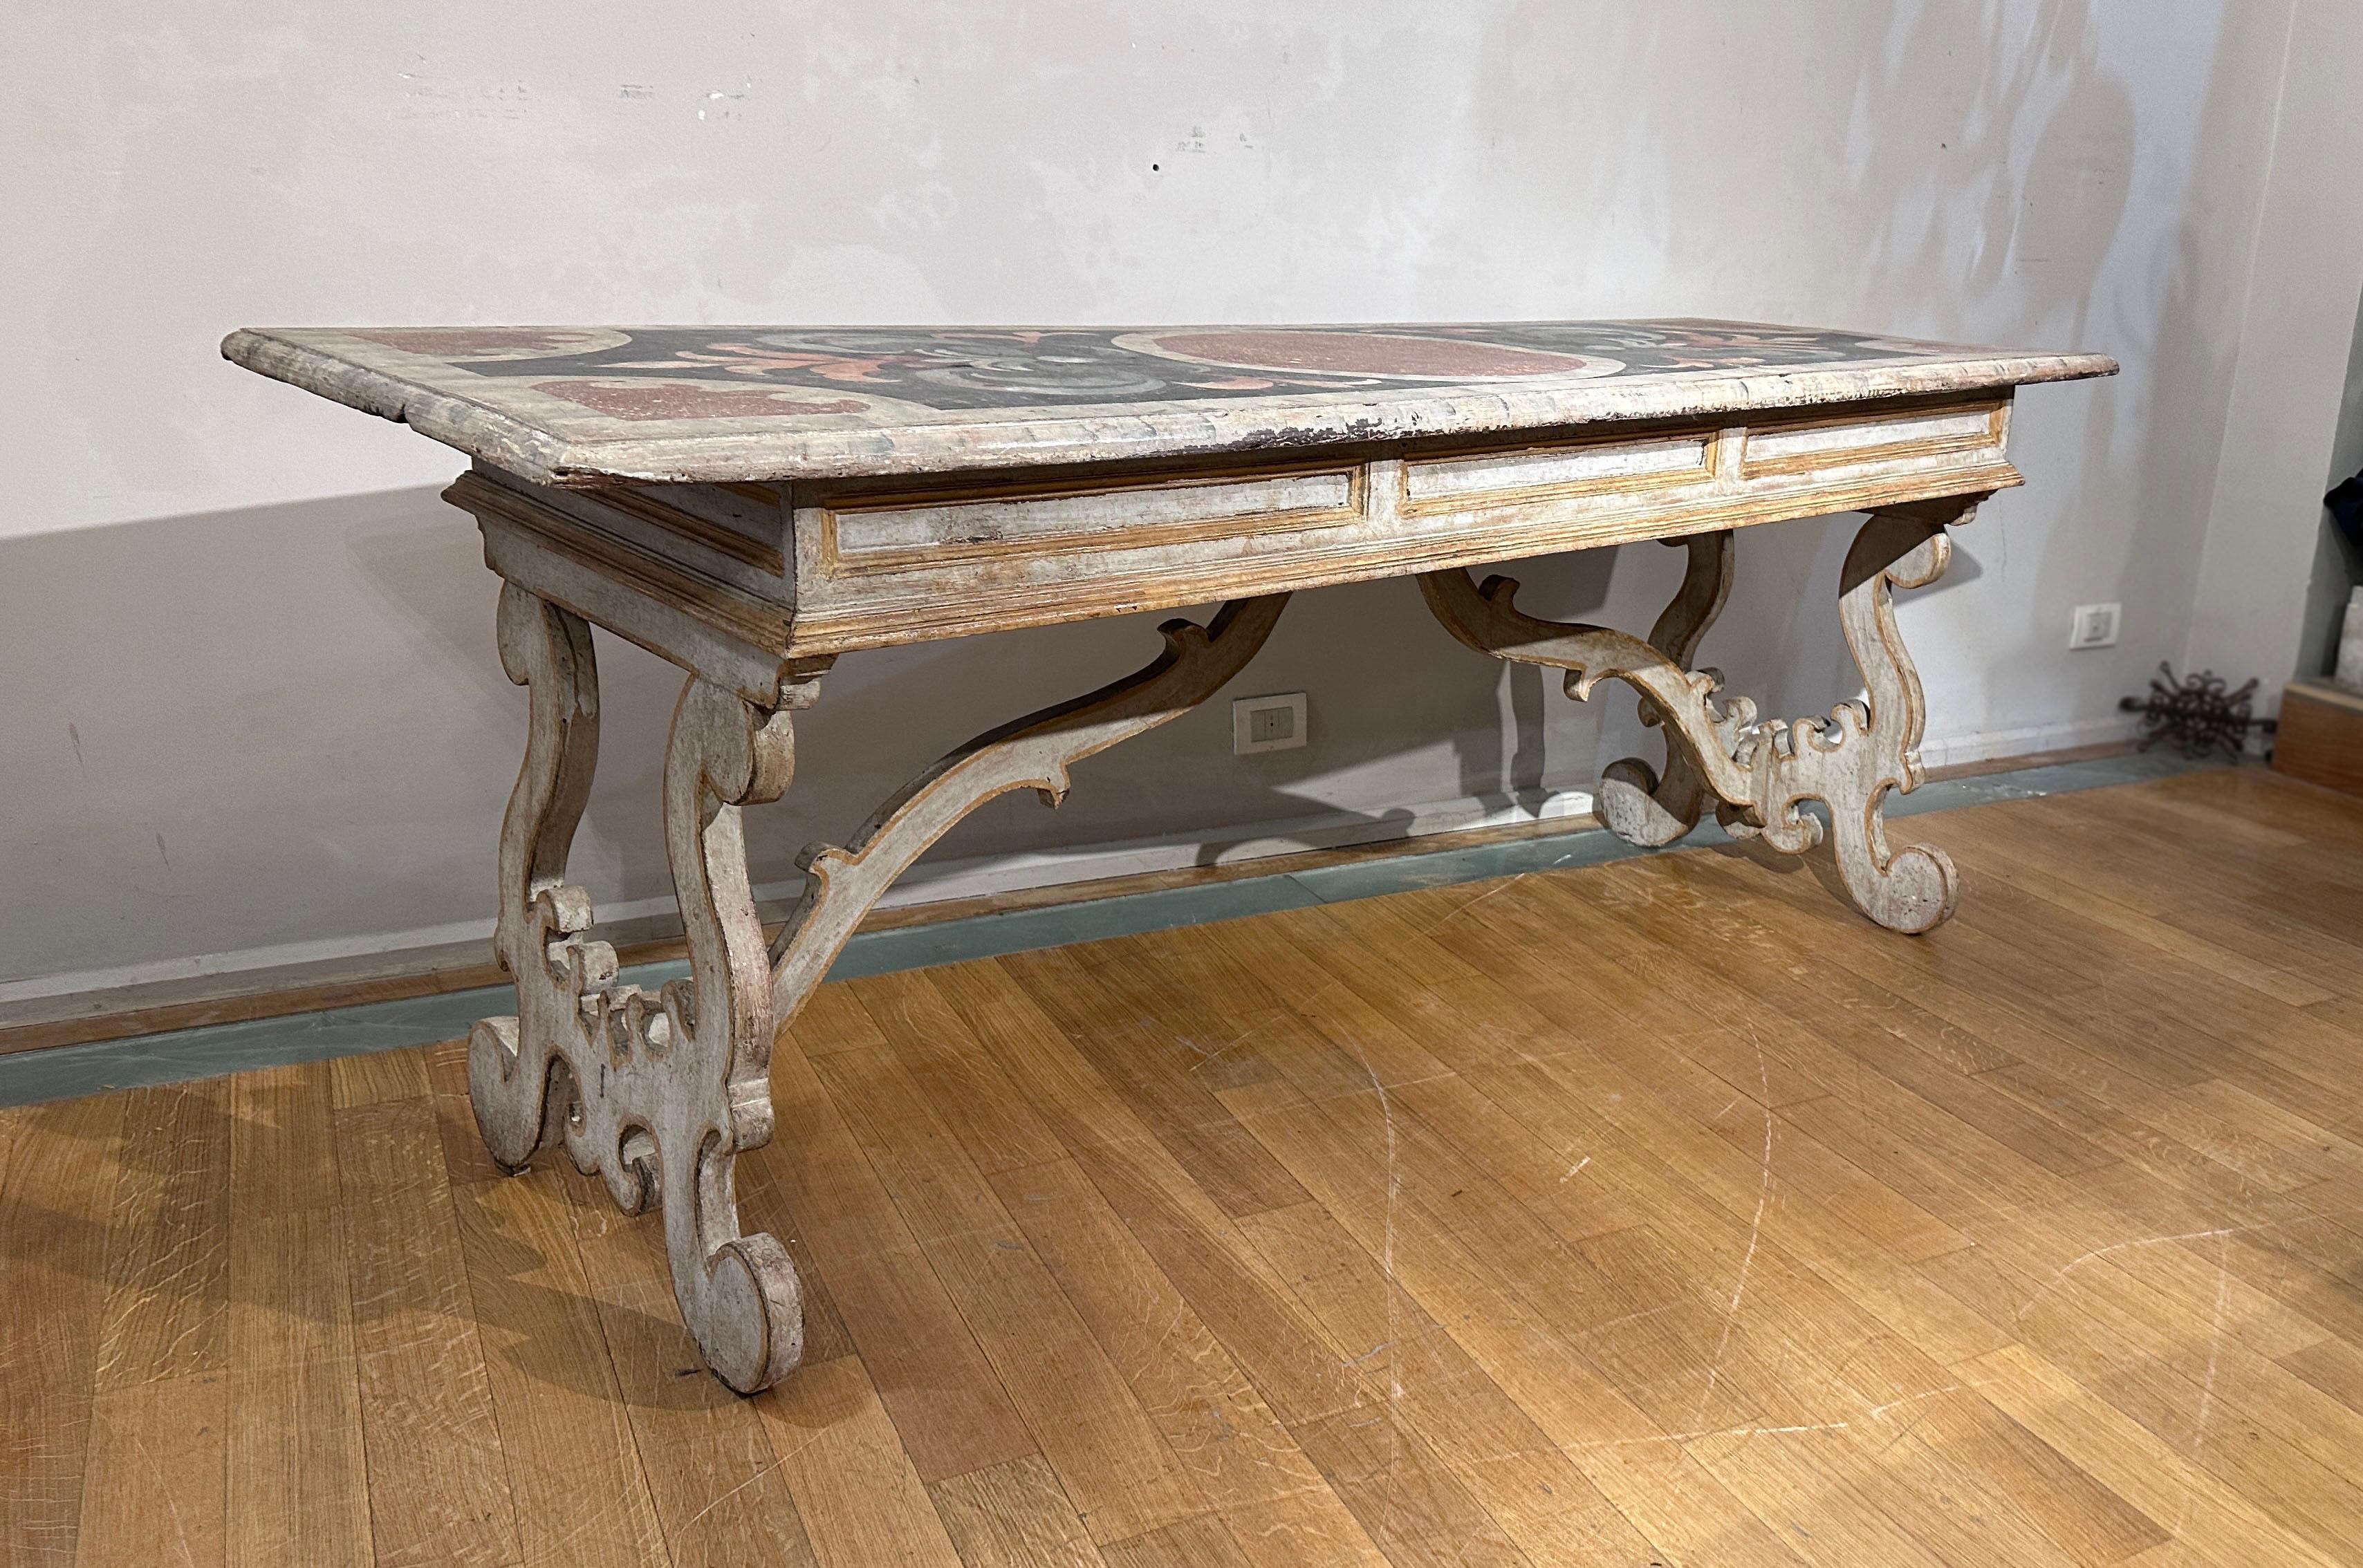 Carved END OF THE 17th CENTURY WOODEN TABLE PAINTED AS MARBLE INLAYS